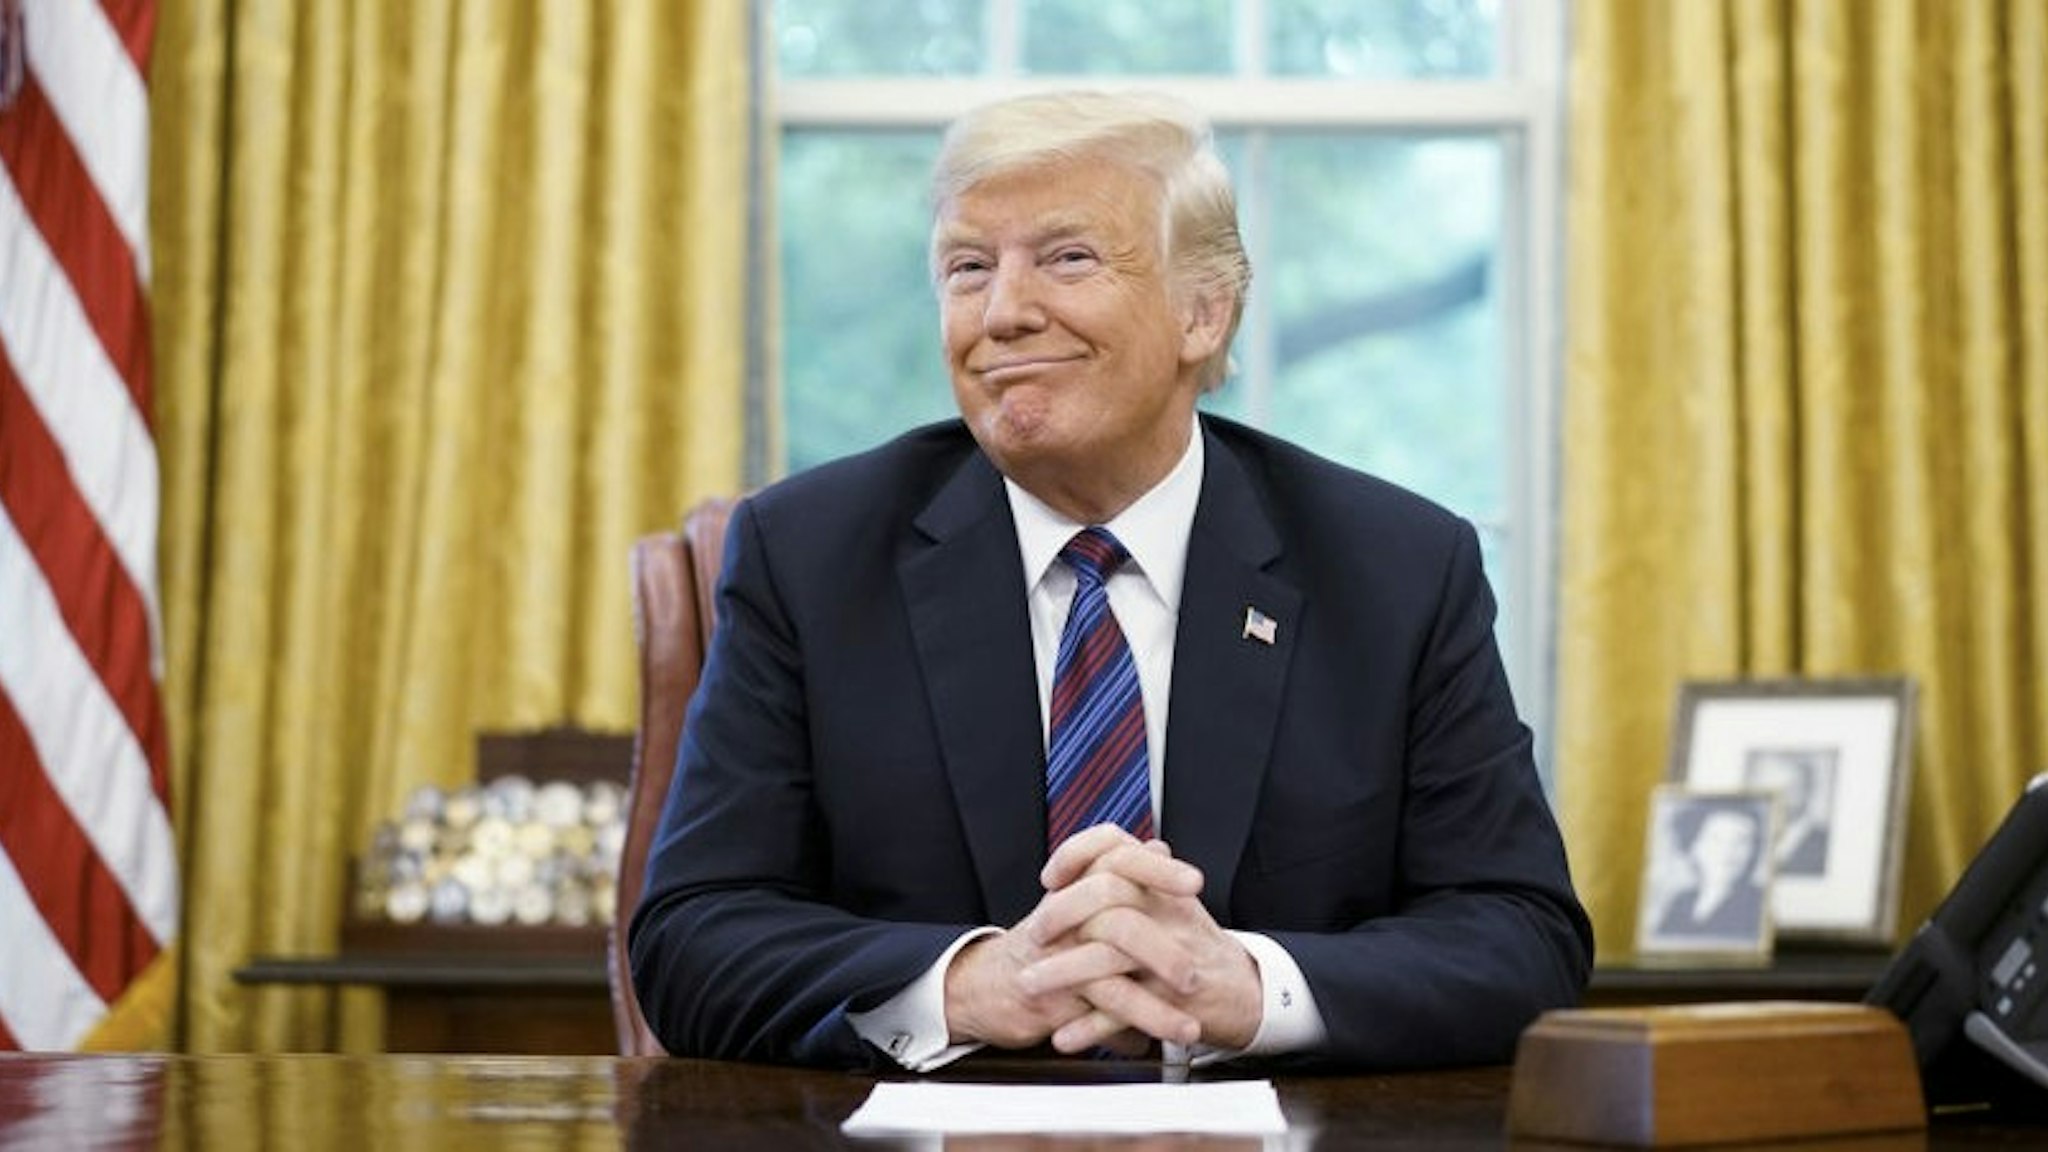 US President Donald Trump smiles during a phone conversation with Mexico's President Enrique Pena Nieto on trade in the Oval Office of the White House in Washington, DC on August 27, 2018. - President Donald Trump said Monday the US had reached a "really good deal" with Mexico and talks with Canada would begin shortly on a new regional free trade pact."It's a big day for trade. It's a really good deal for both countries," Trump said."Canada, we will start negotiations shortly. I'll be calling their prime minister very soon," Trump said.US and Mexican negotiators have been working for weeks to iron out differences in order to revise the nearly 25-year old North American Free Trade Agreement, while Canada was waiting to rejoin the negotiations. (Photo by MANDEL NGAN / AFP) (Photo by